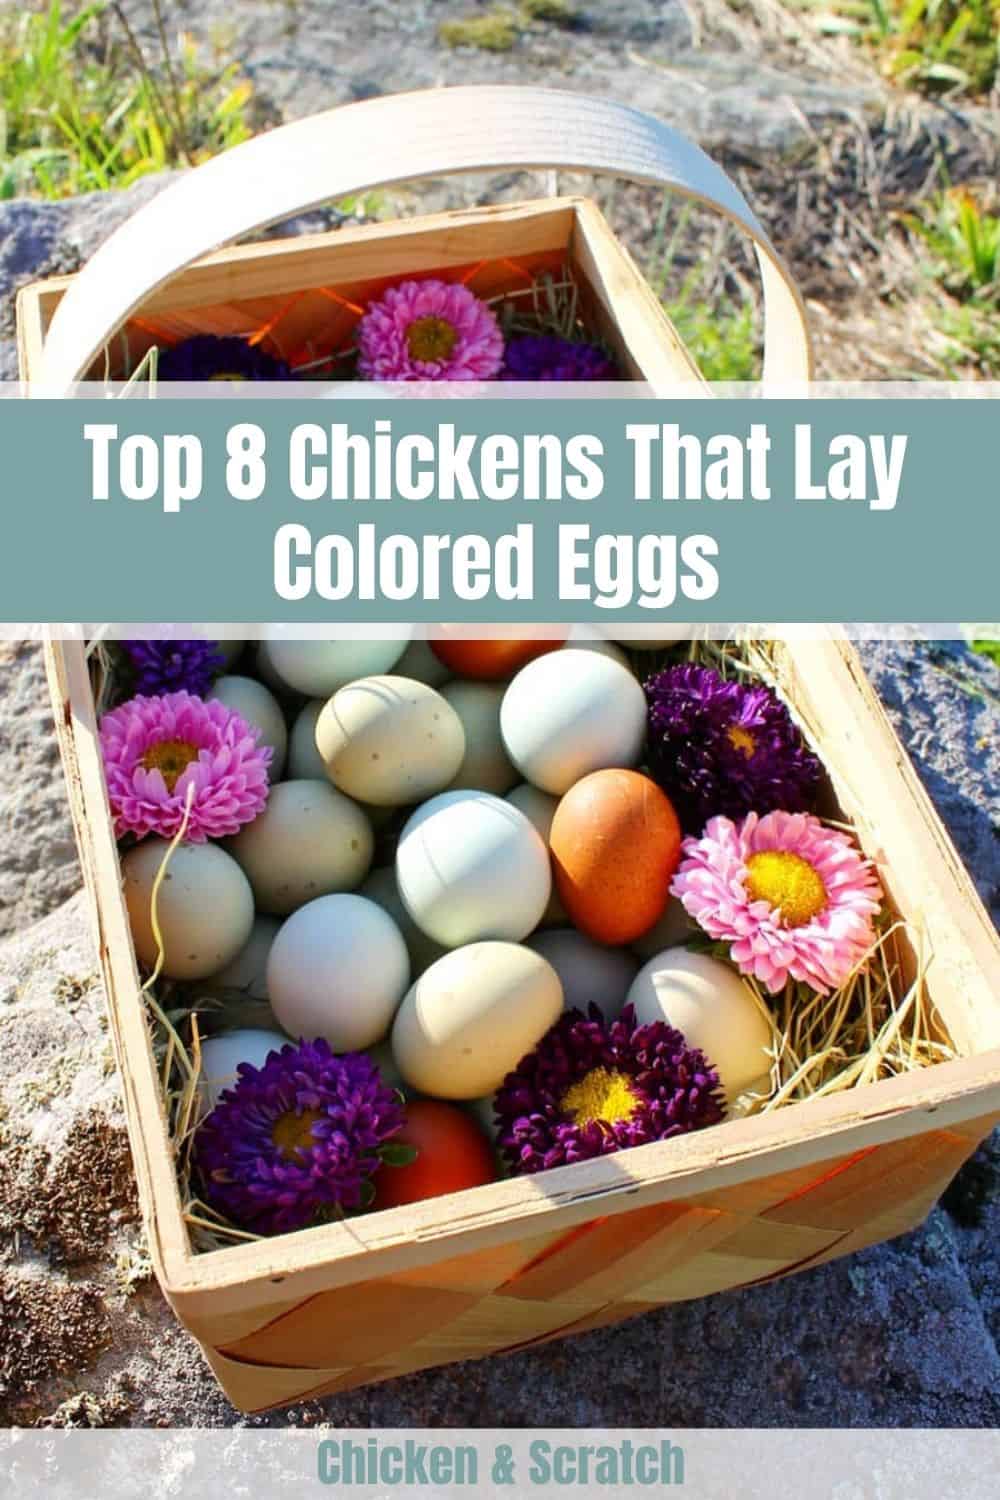 Top 8 Chickens That Lay Colored Eggs (with Pictures)